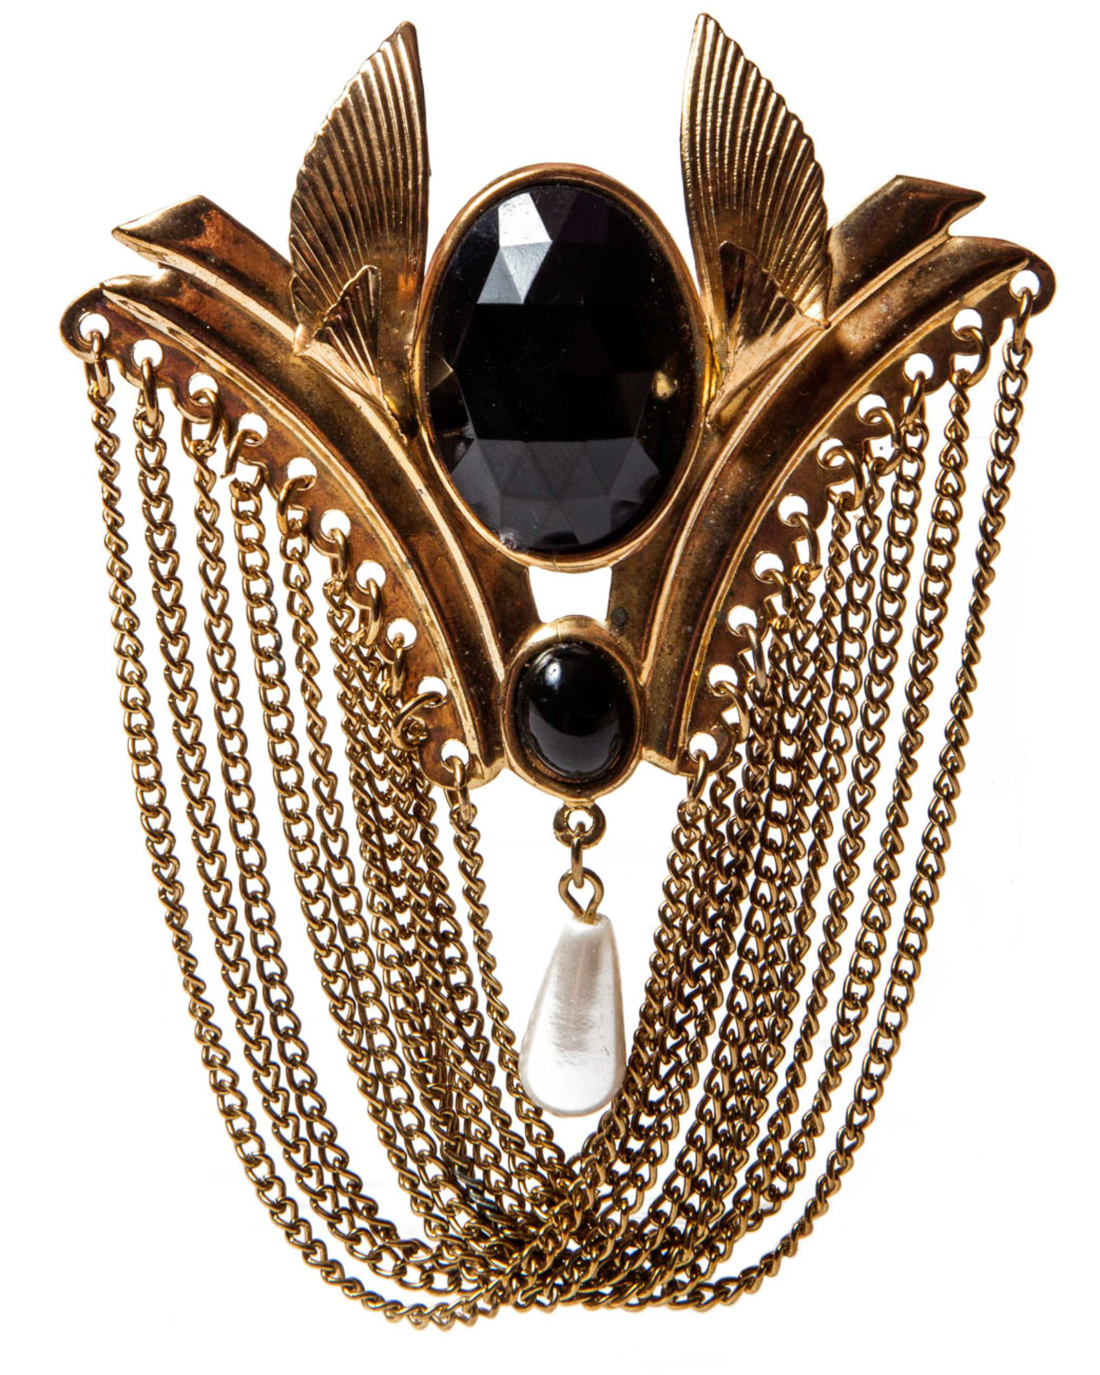 Vintage Black And Pearl Brooch Dripping In Gold Washed Chains, circa 1980's